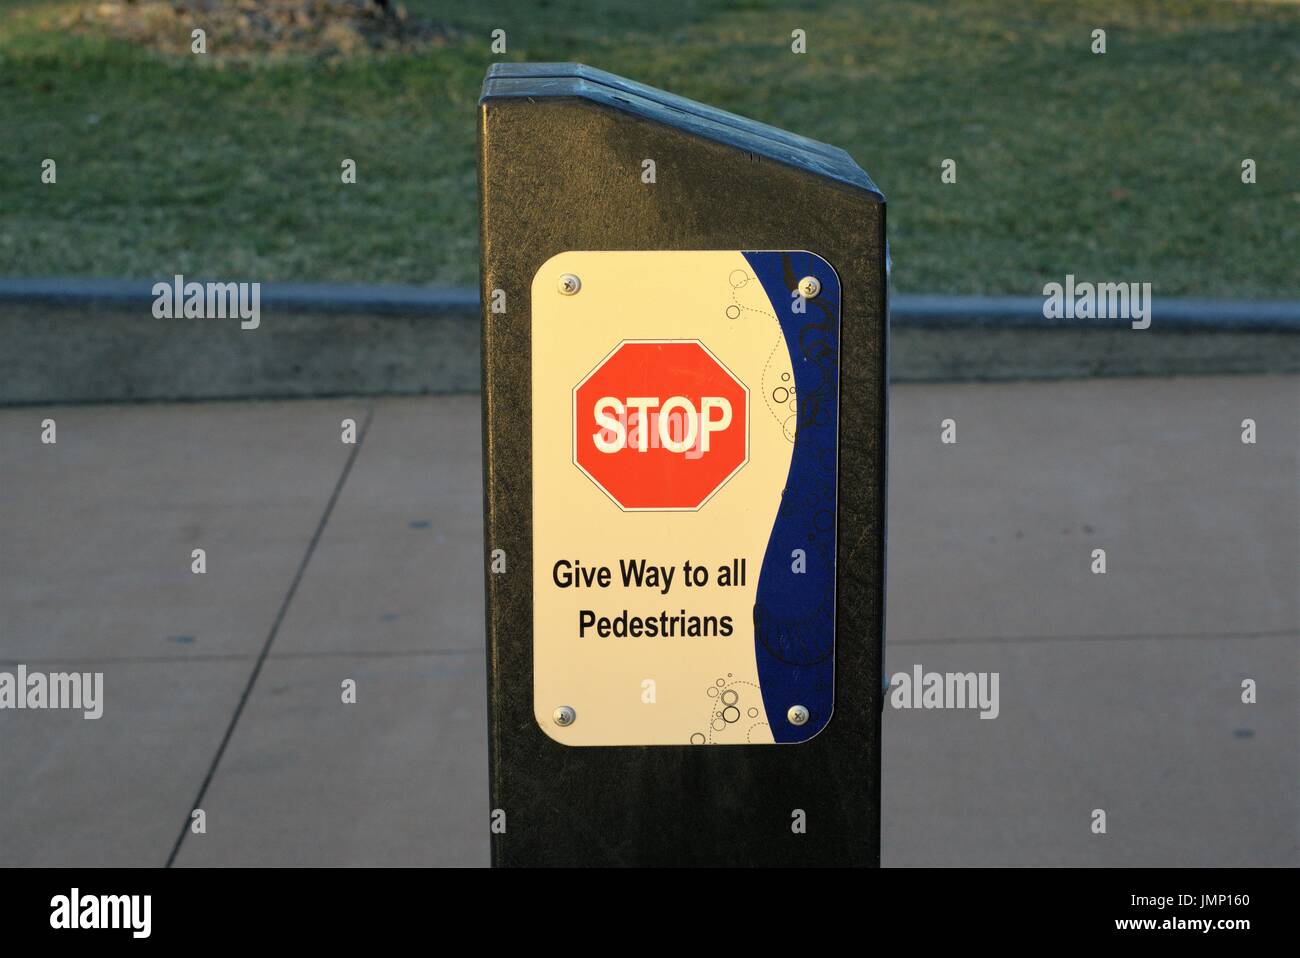 Red Stop Sign on pillar. Sign post at a public place says 'Stop Give Way to all Pedestrians' Stock Photo